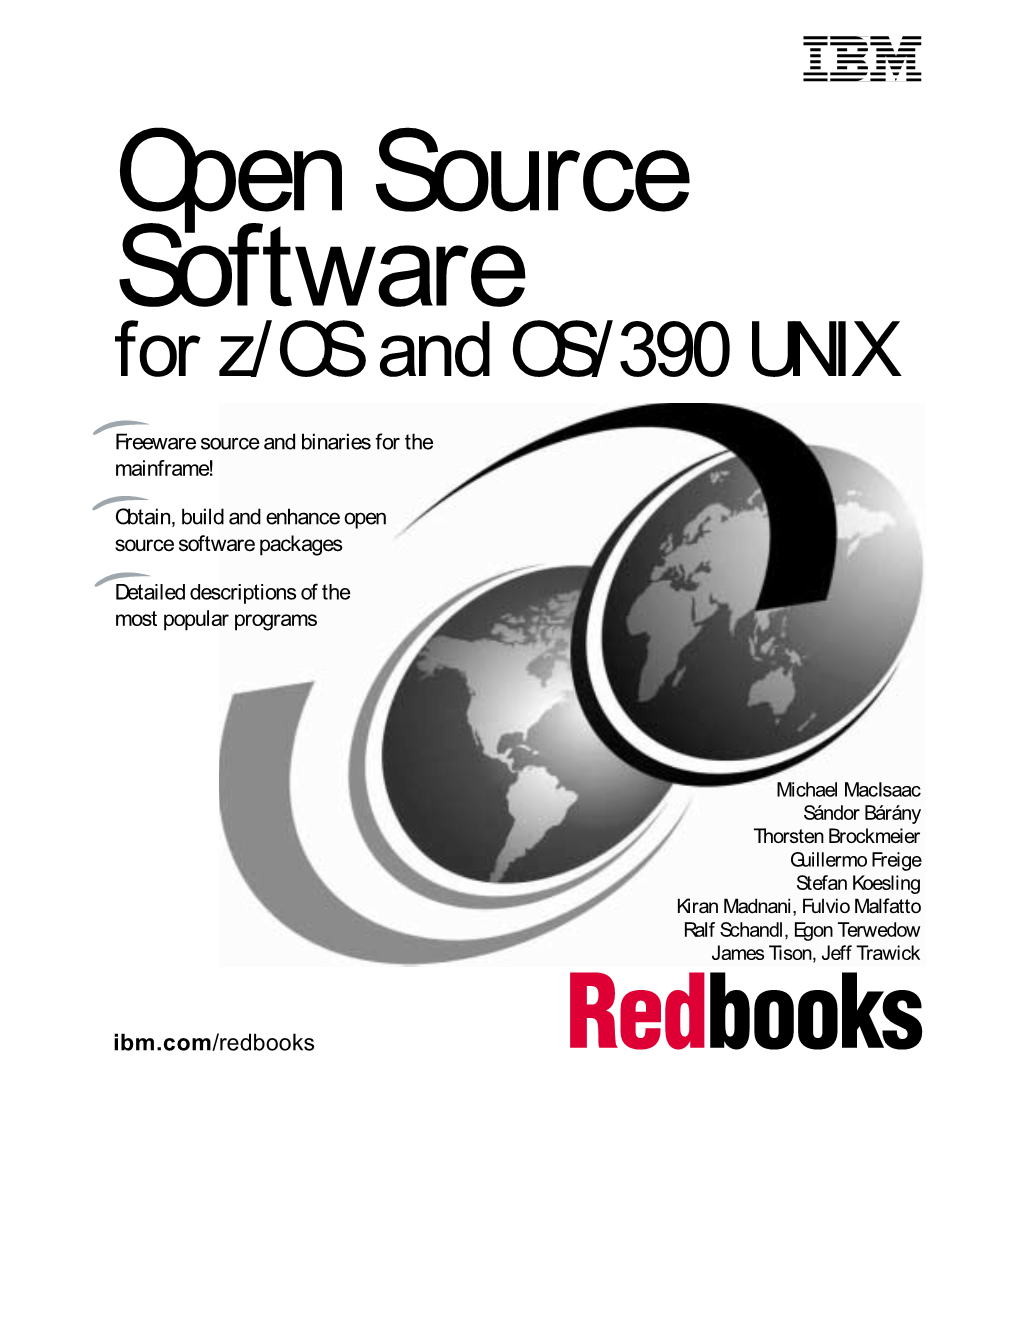 Open Source Software for Z/OS and OS/390 UNIX